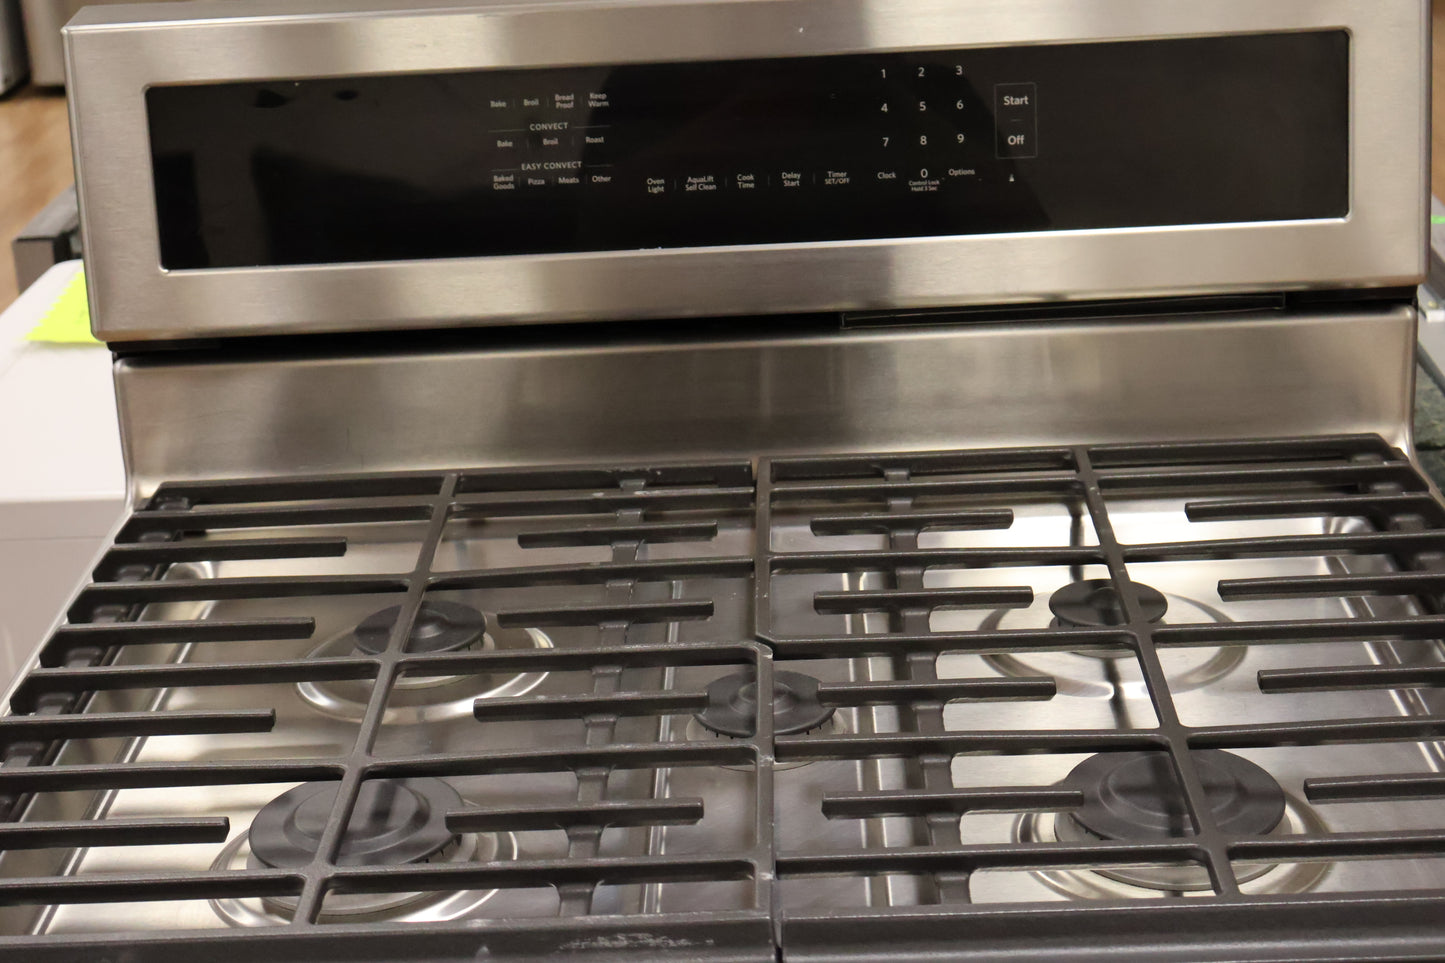 5.8 cu. ft. Gas Range with Convection Self-Cleaning Oven in Stainless Steel